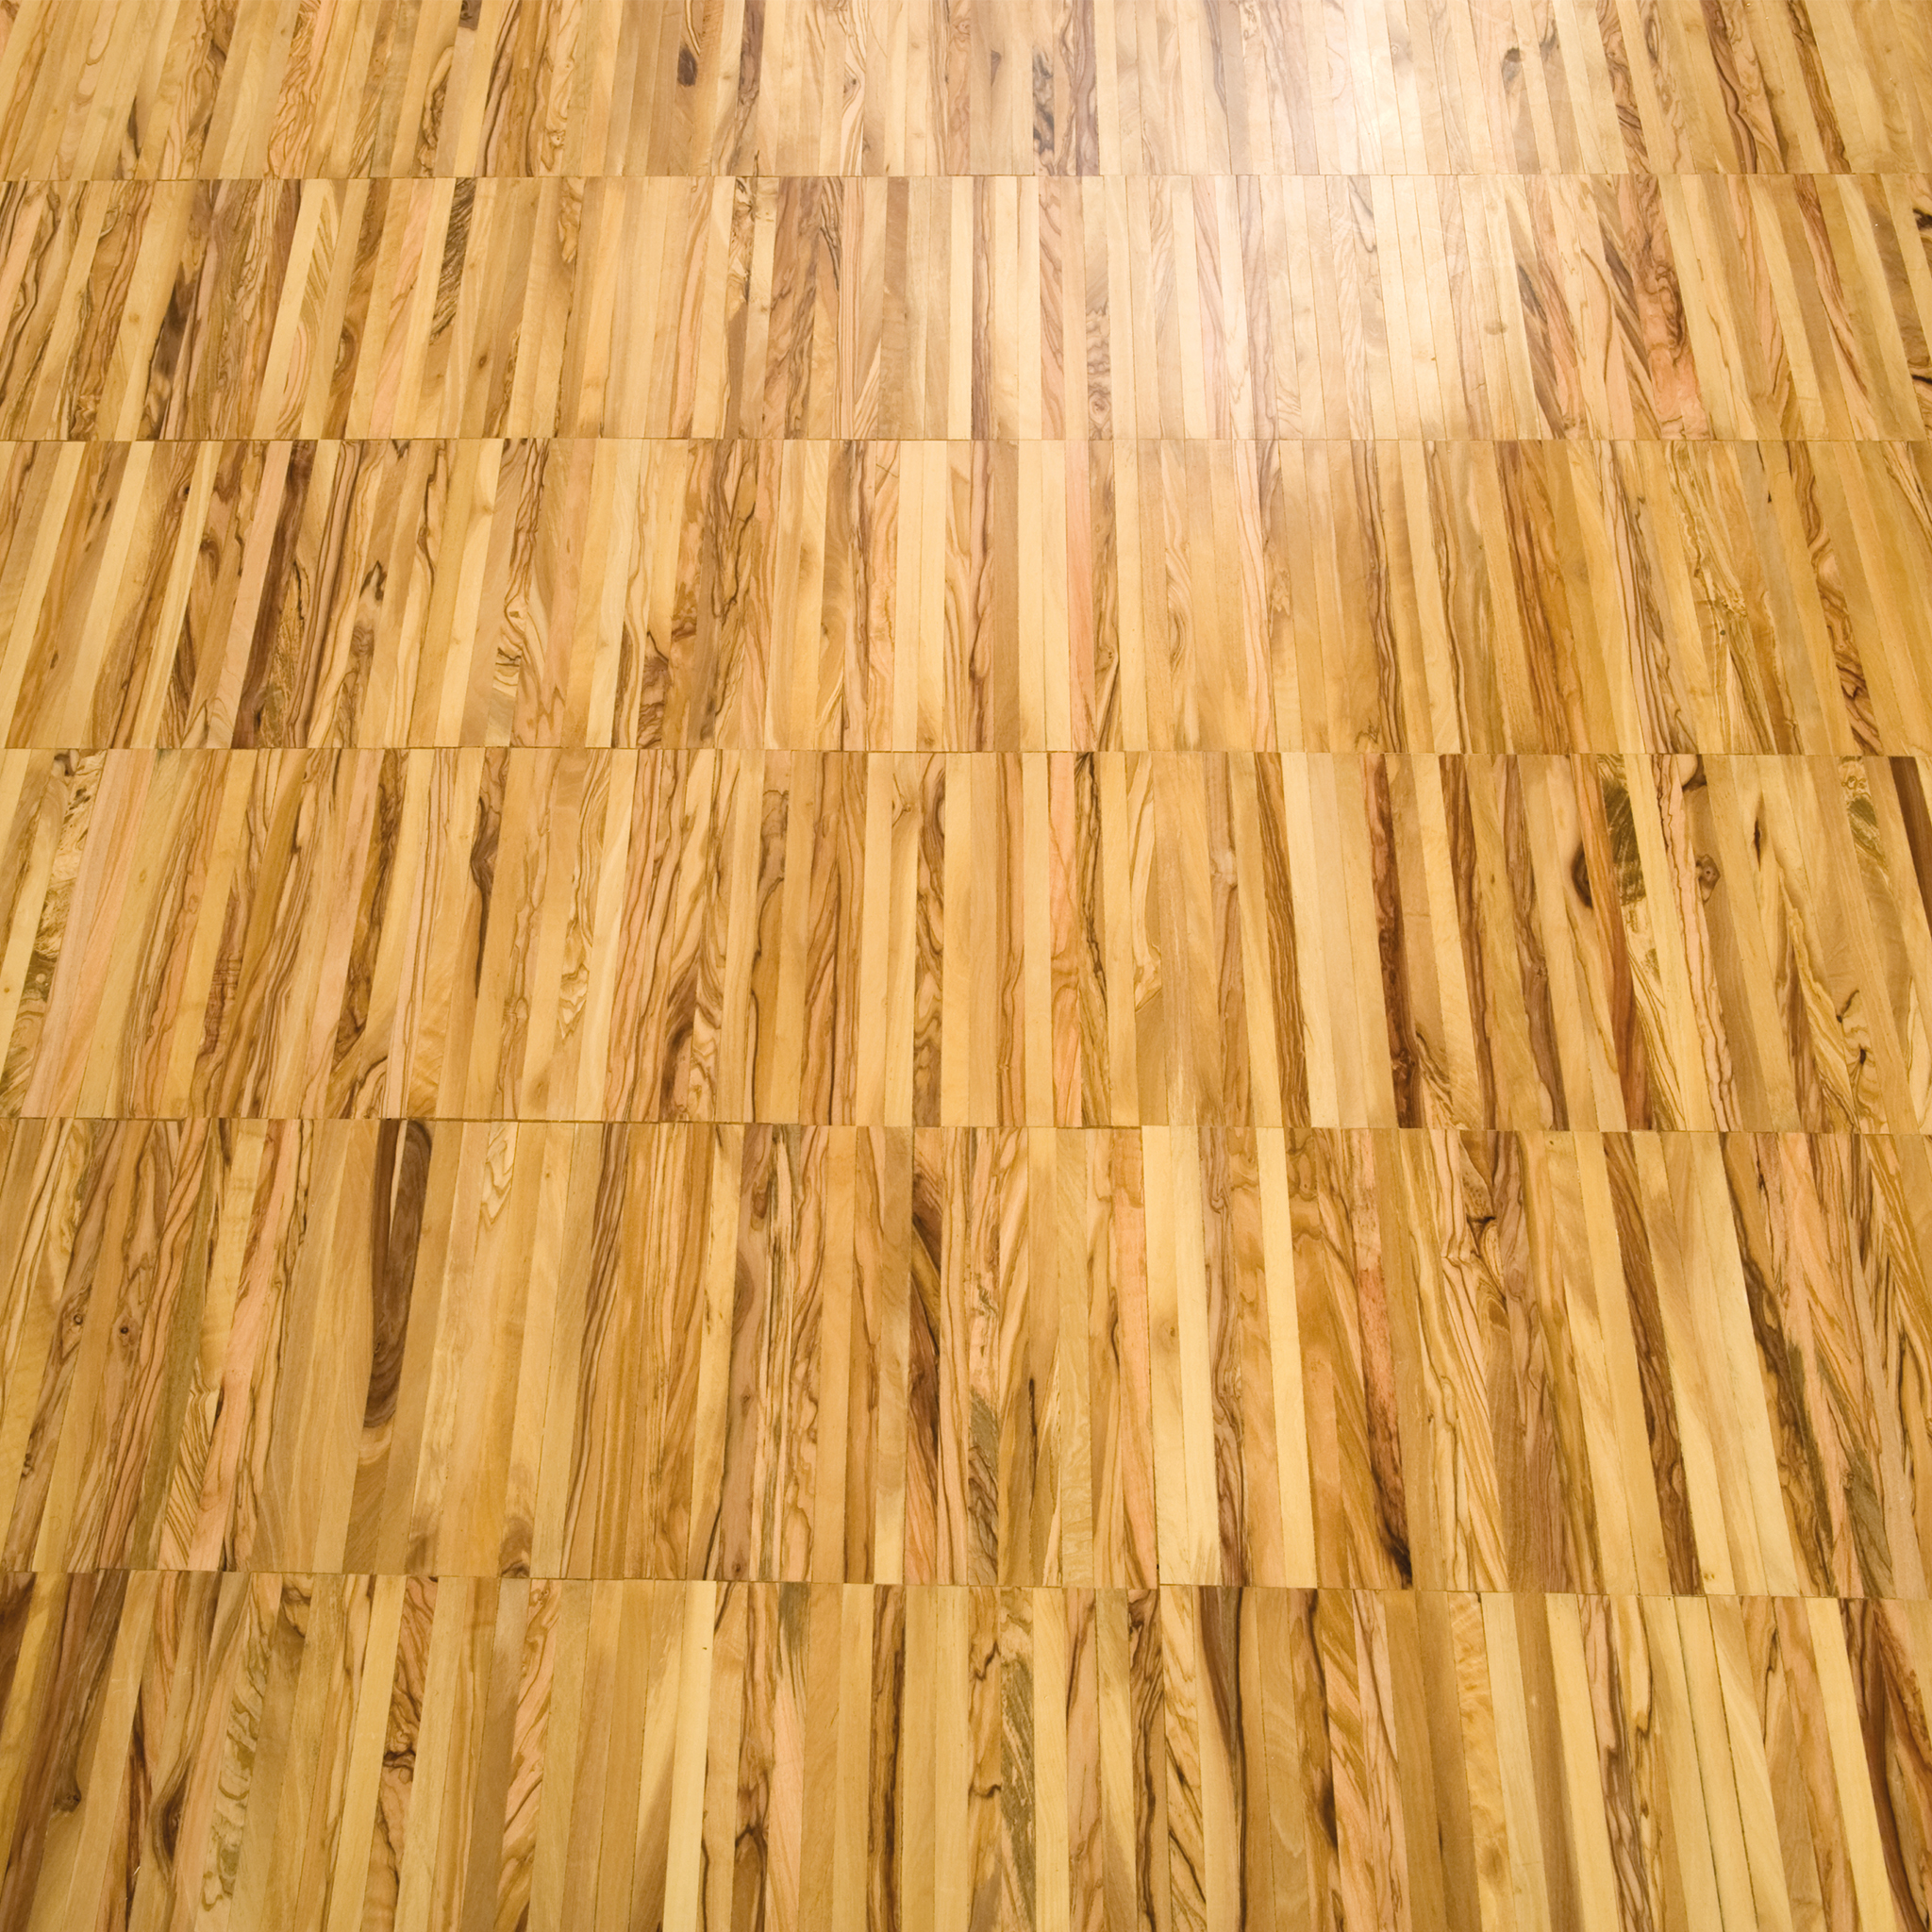 Olive wood parquet industry V14i